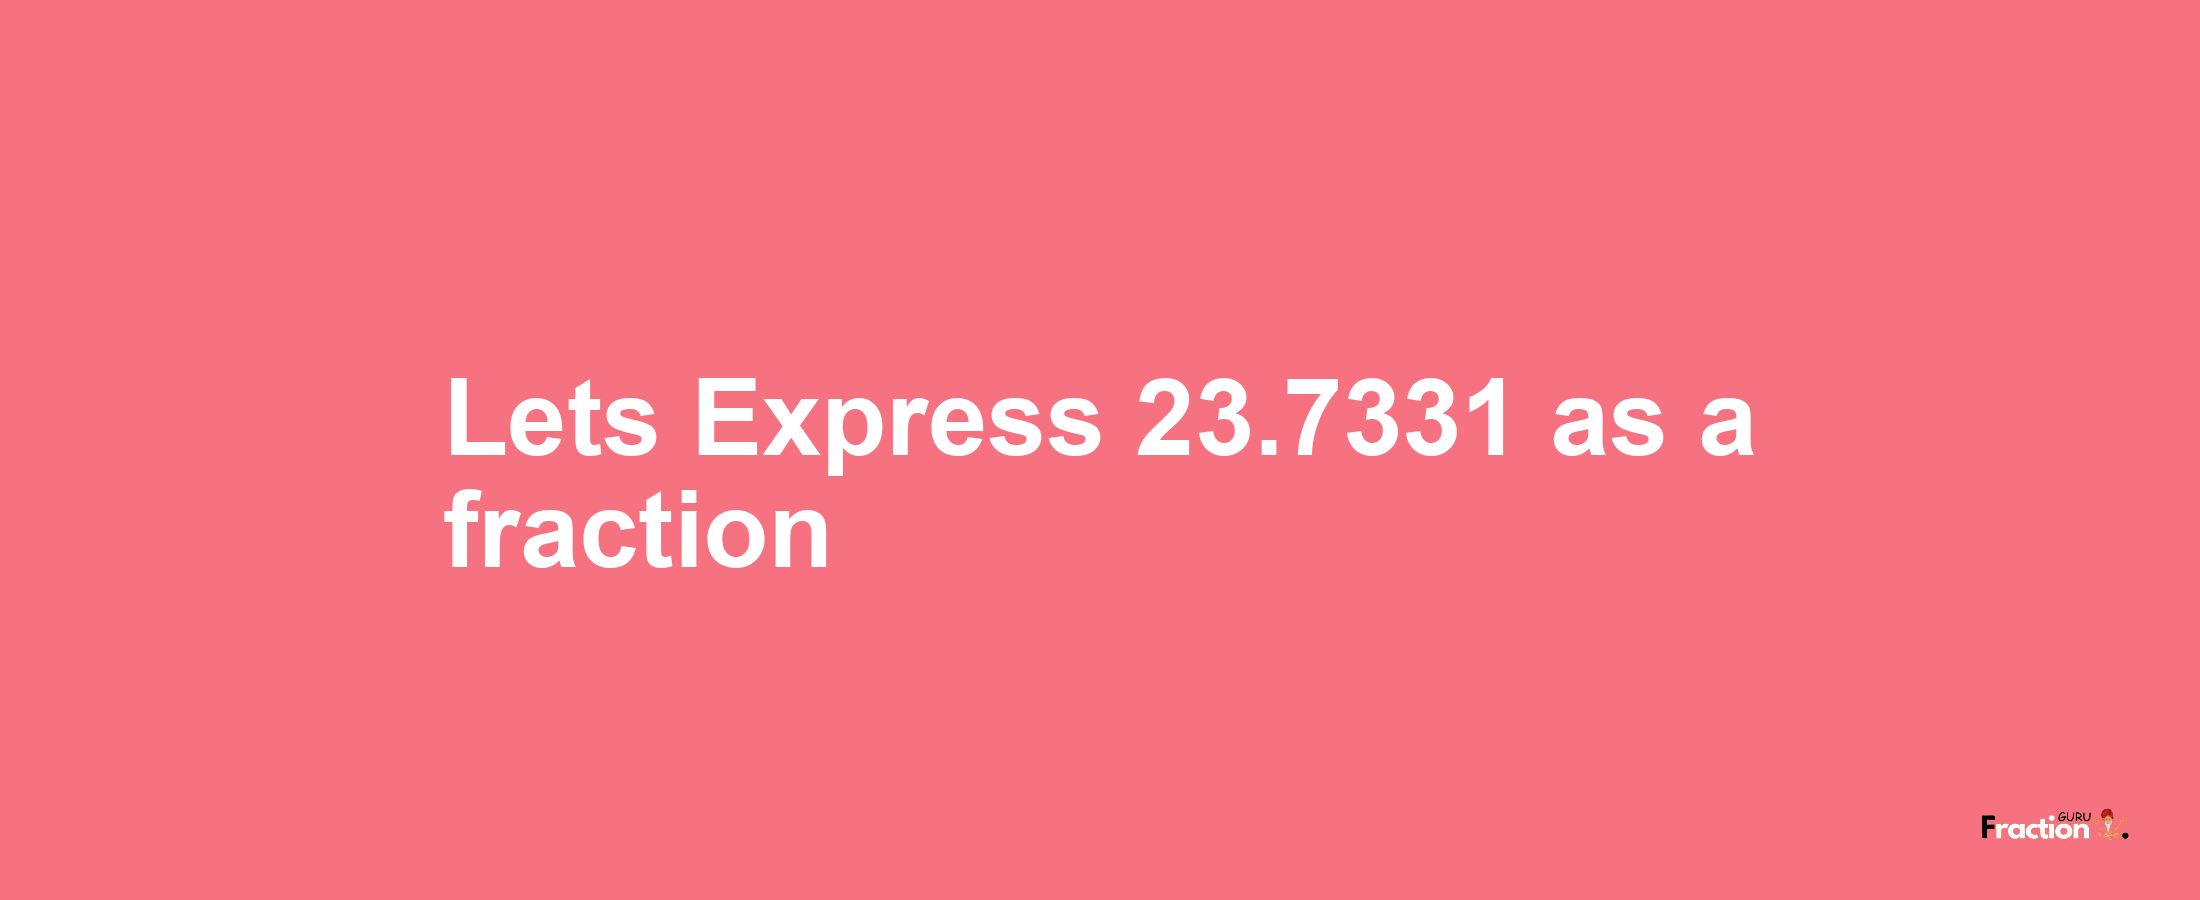 Lets Express 23.7331 as afraction